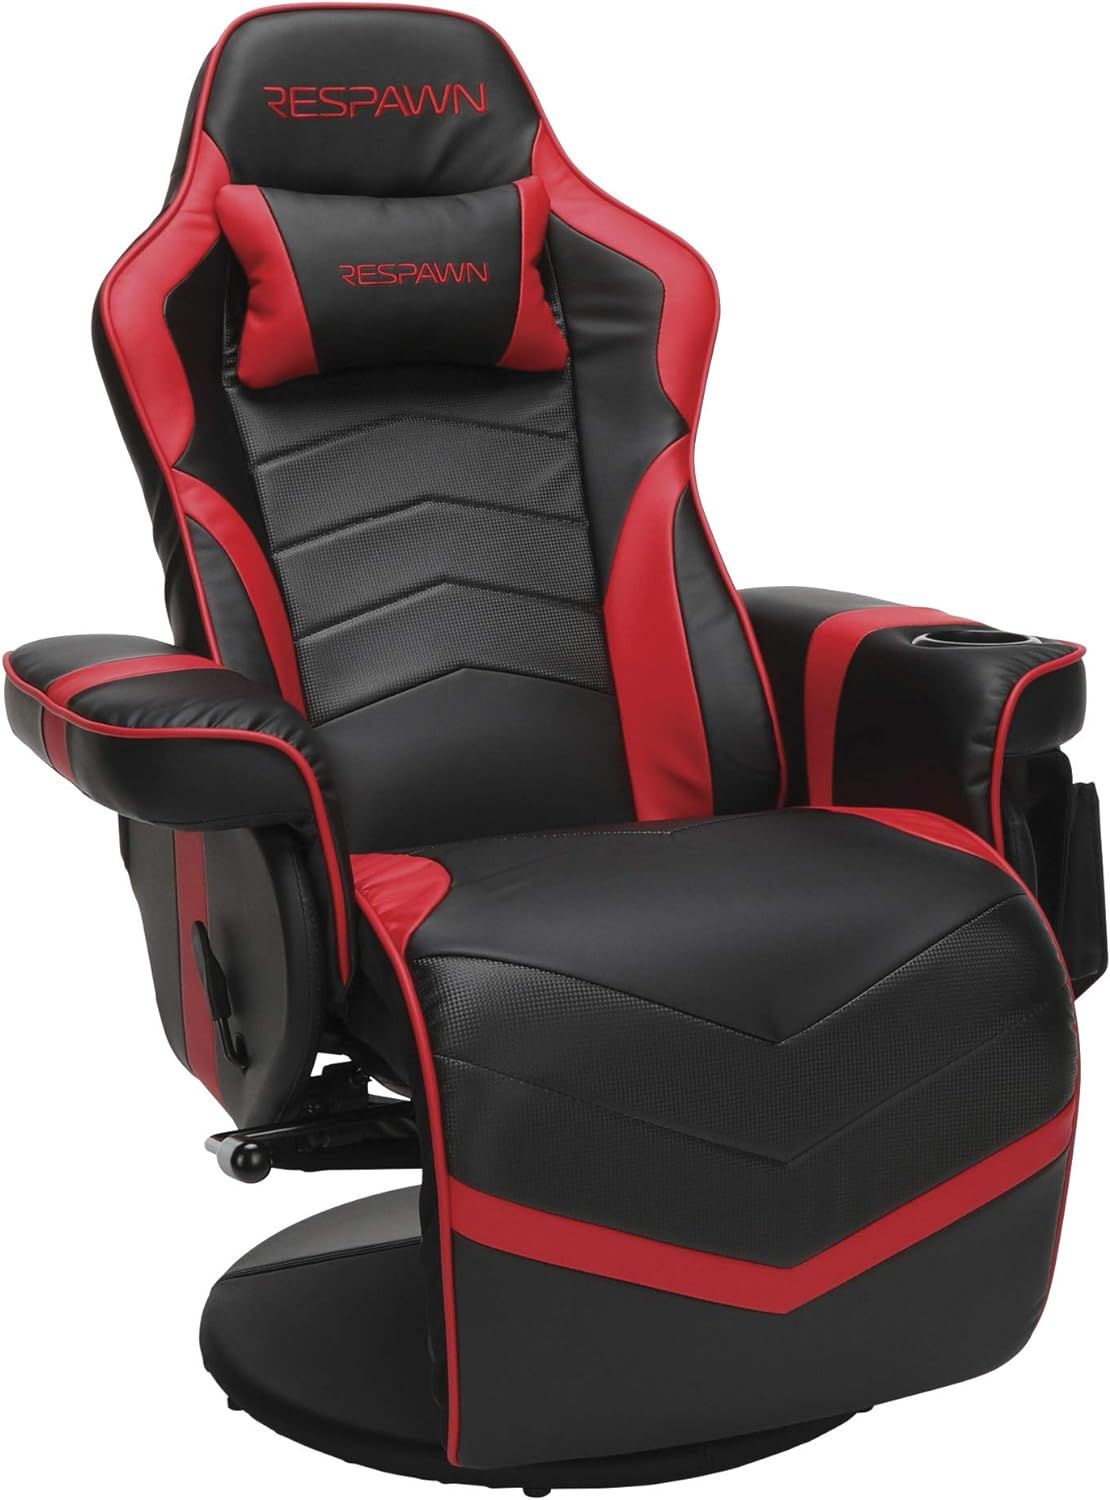 RESPAWN RSP-900 Gaming Chair